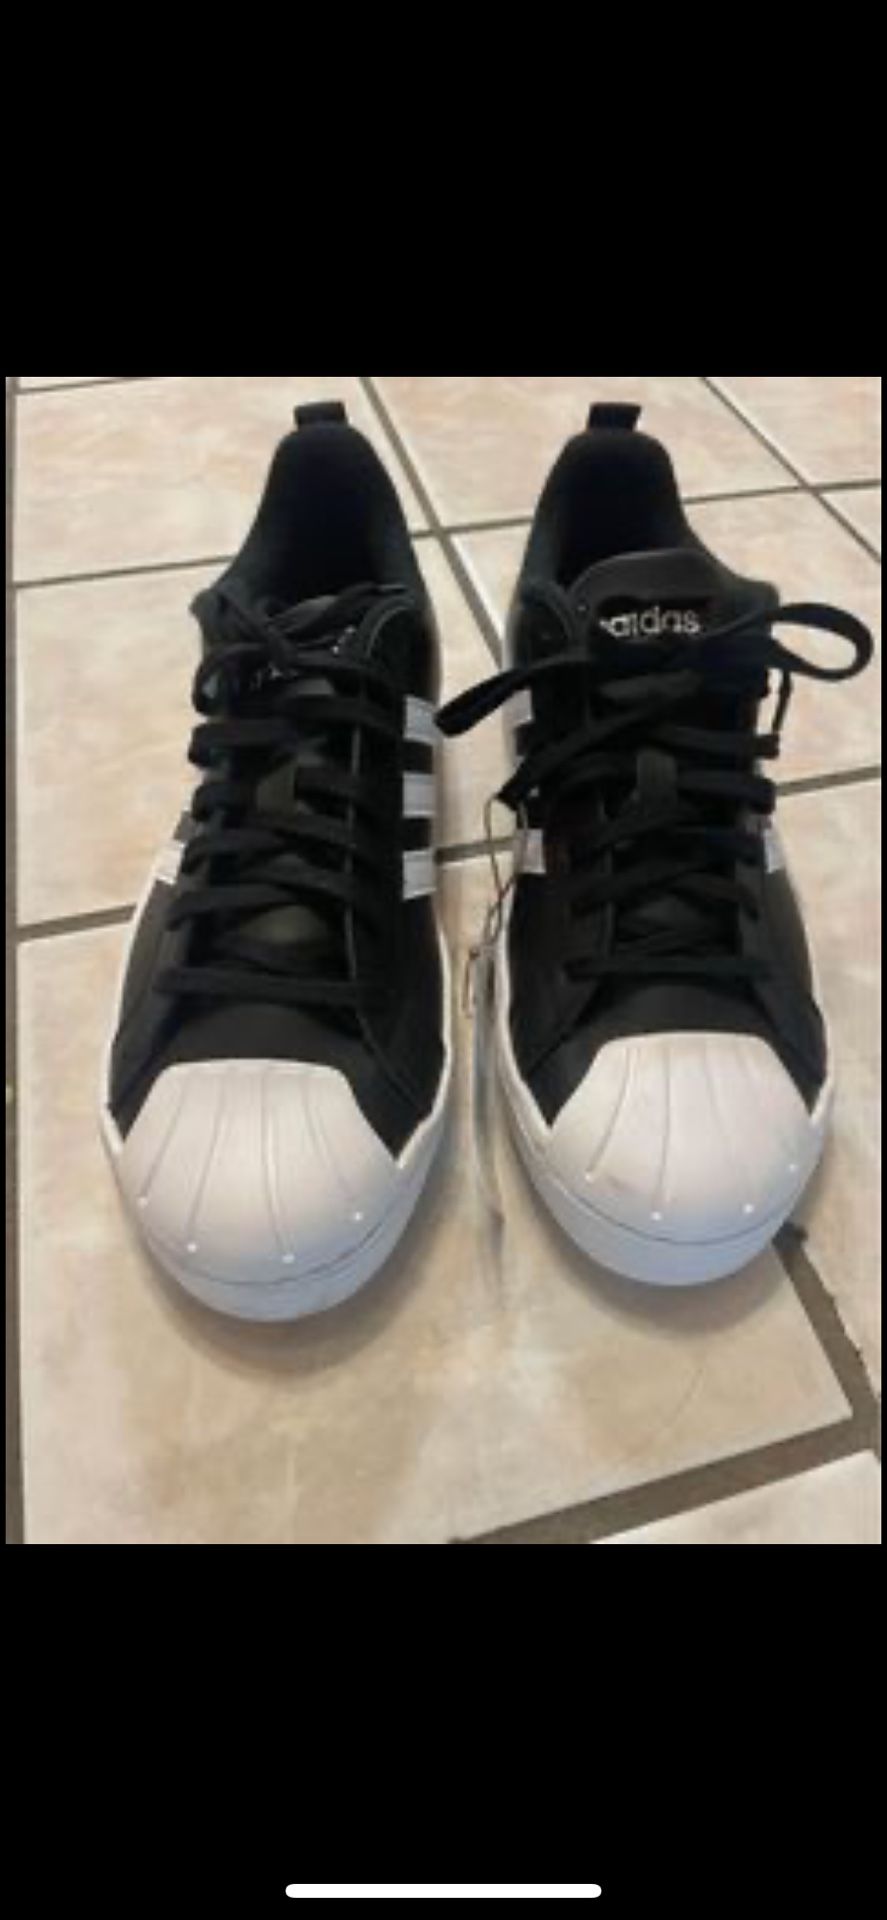 Adidas Sneakers New! Size 7 Boys Or 8 Women’s 